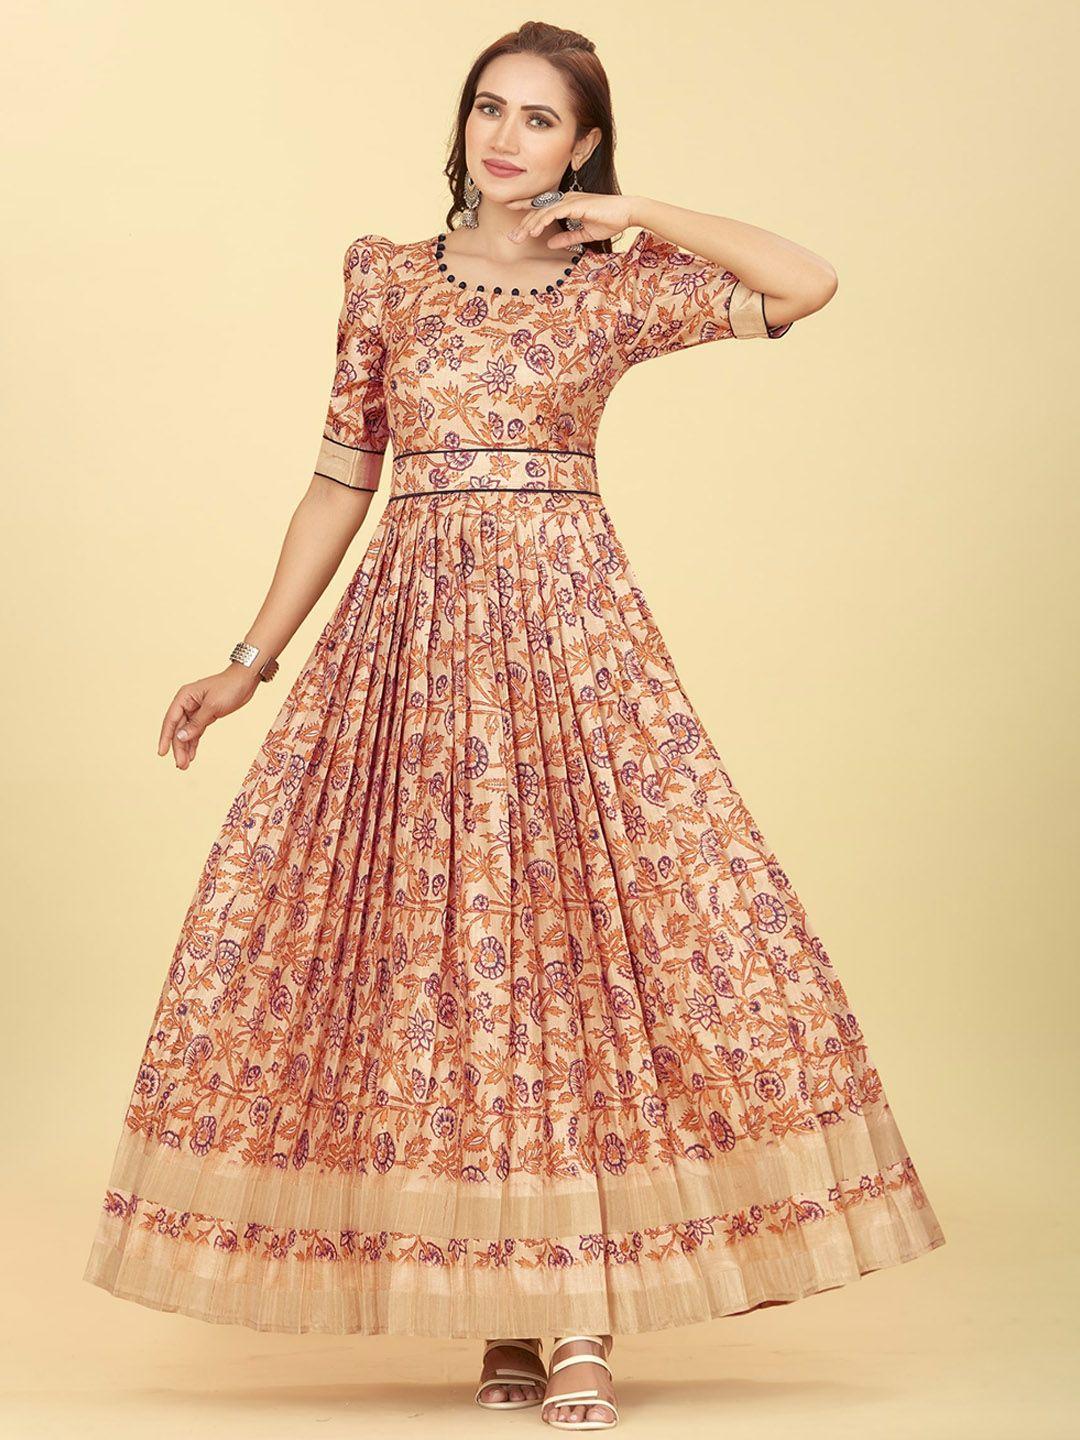 chansi floral printed silk flared ethnic dress comes with a belt